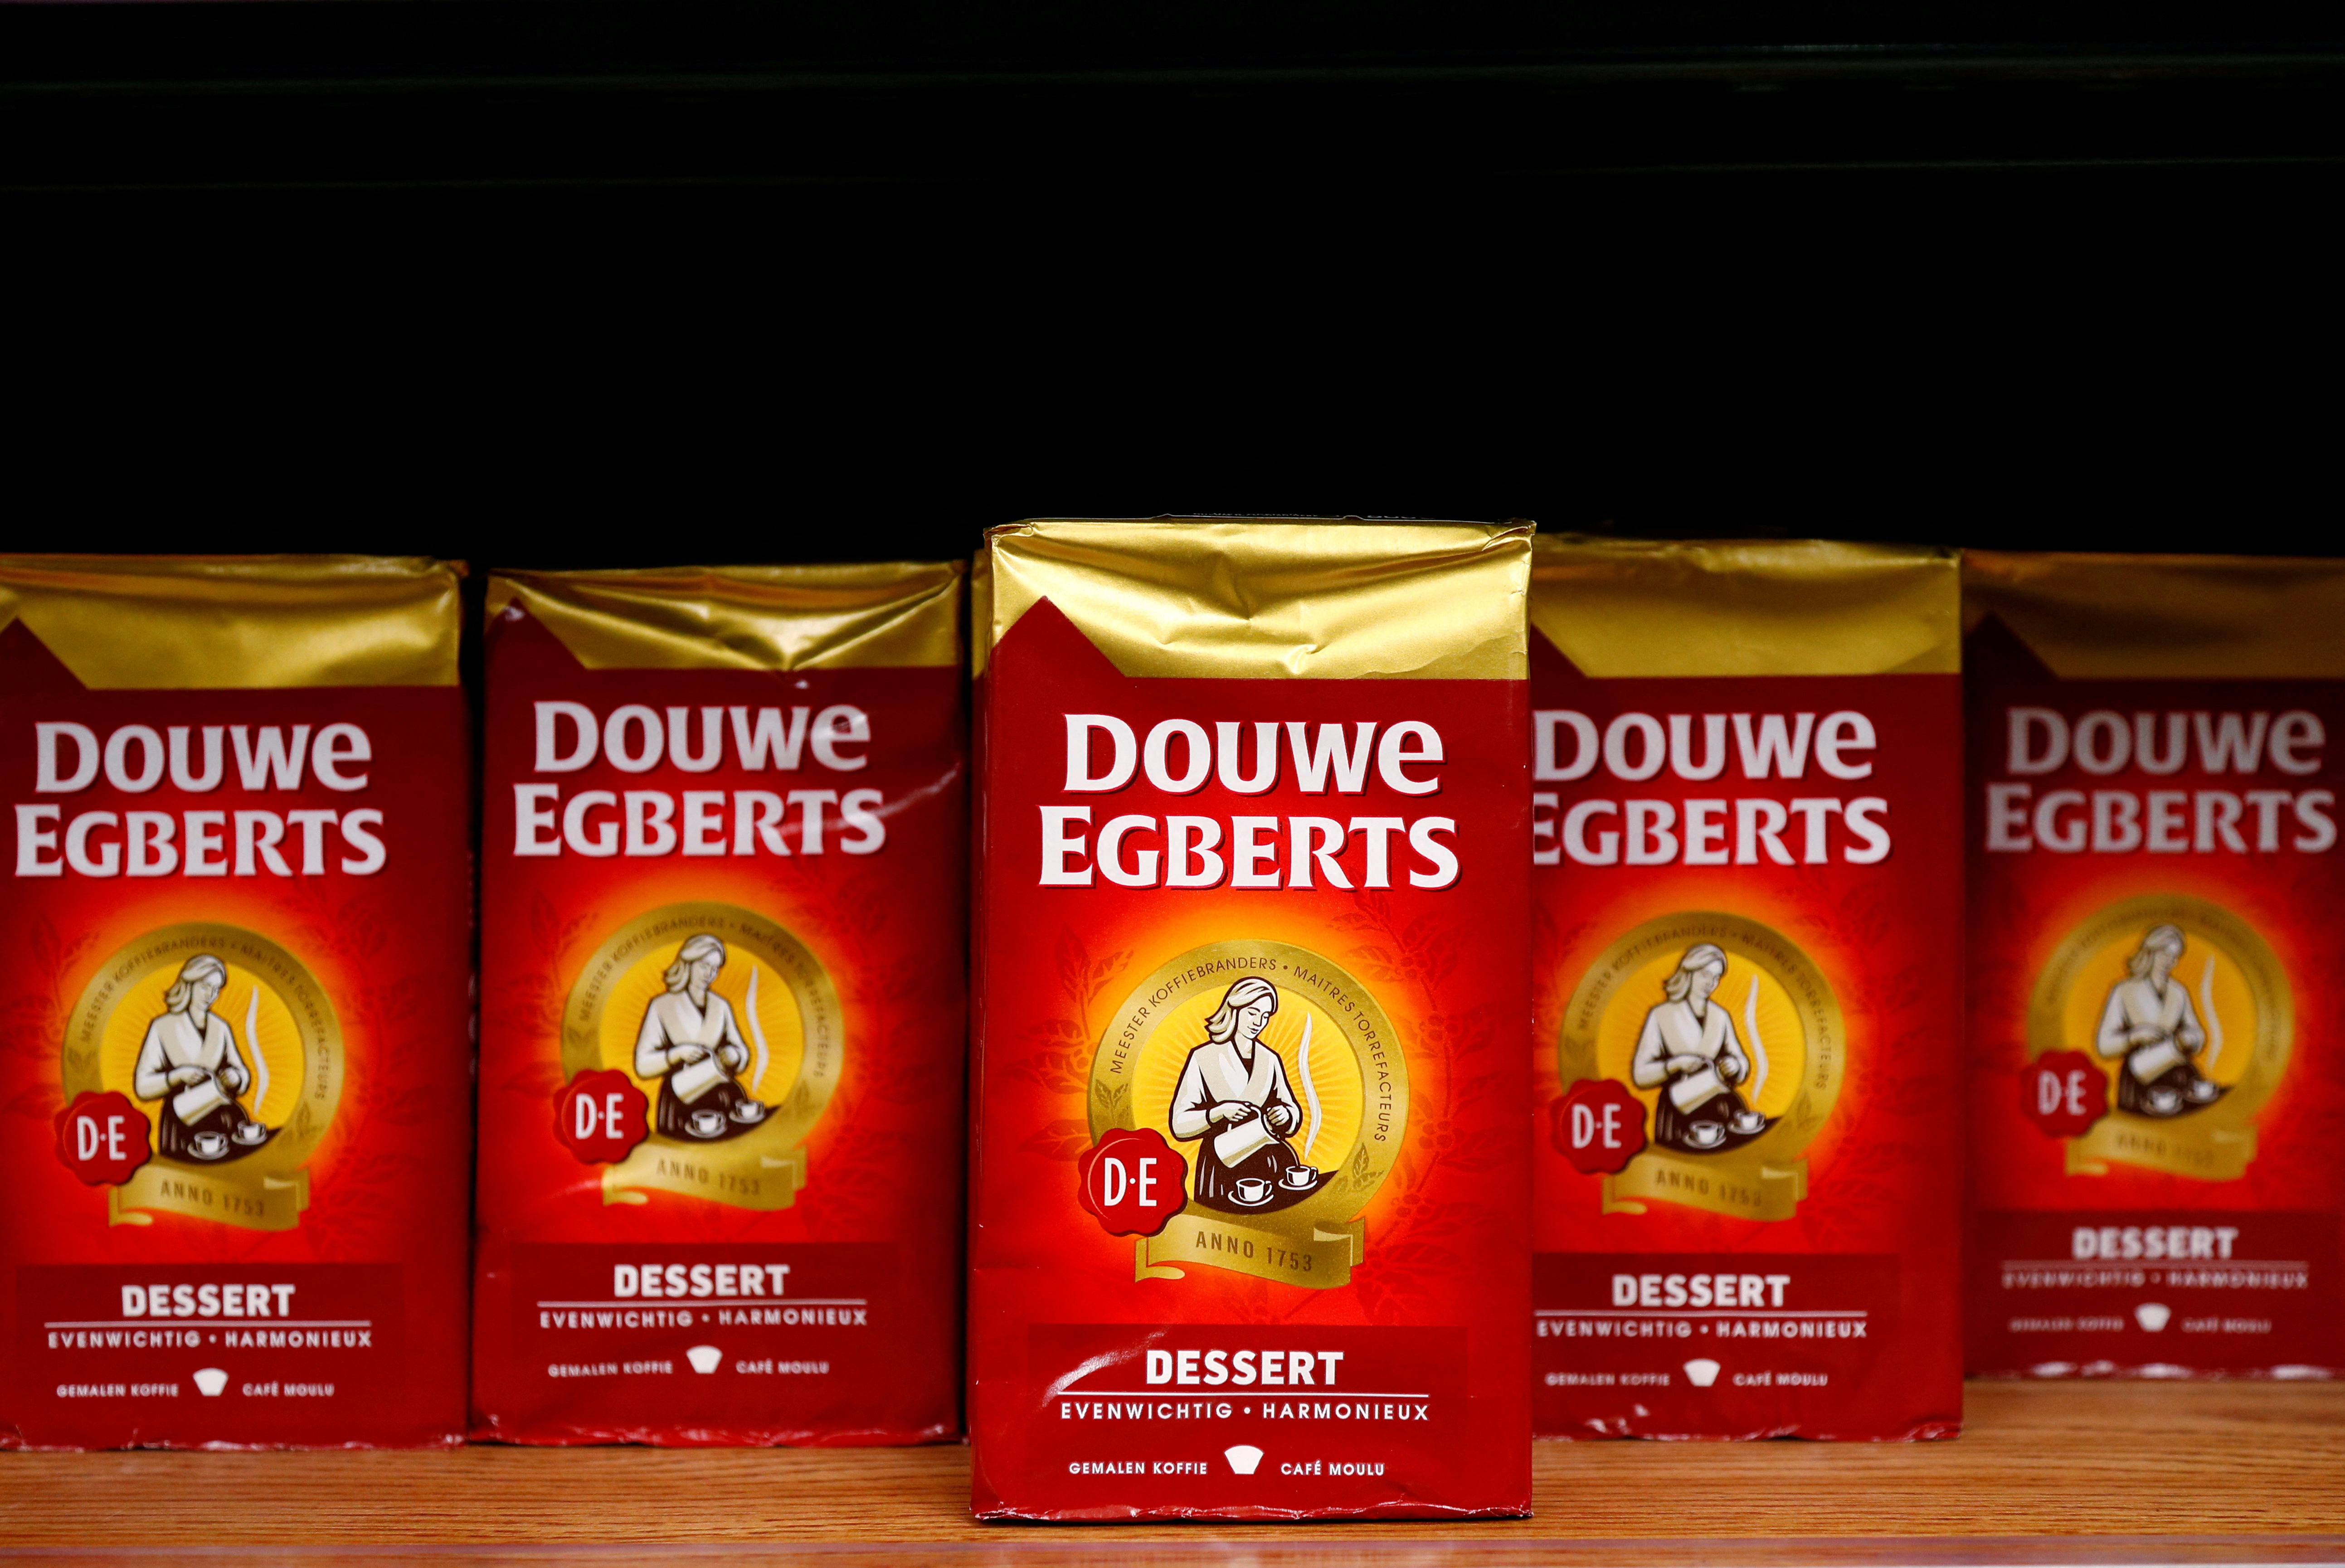 Douwe Egberts coffee packets are seen at a Carrefour supermarket in Brussels